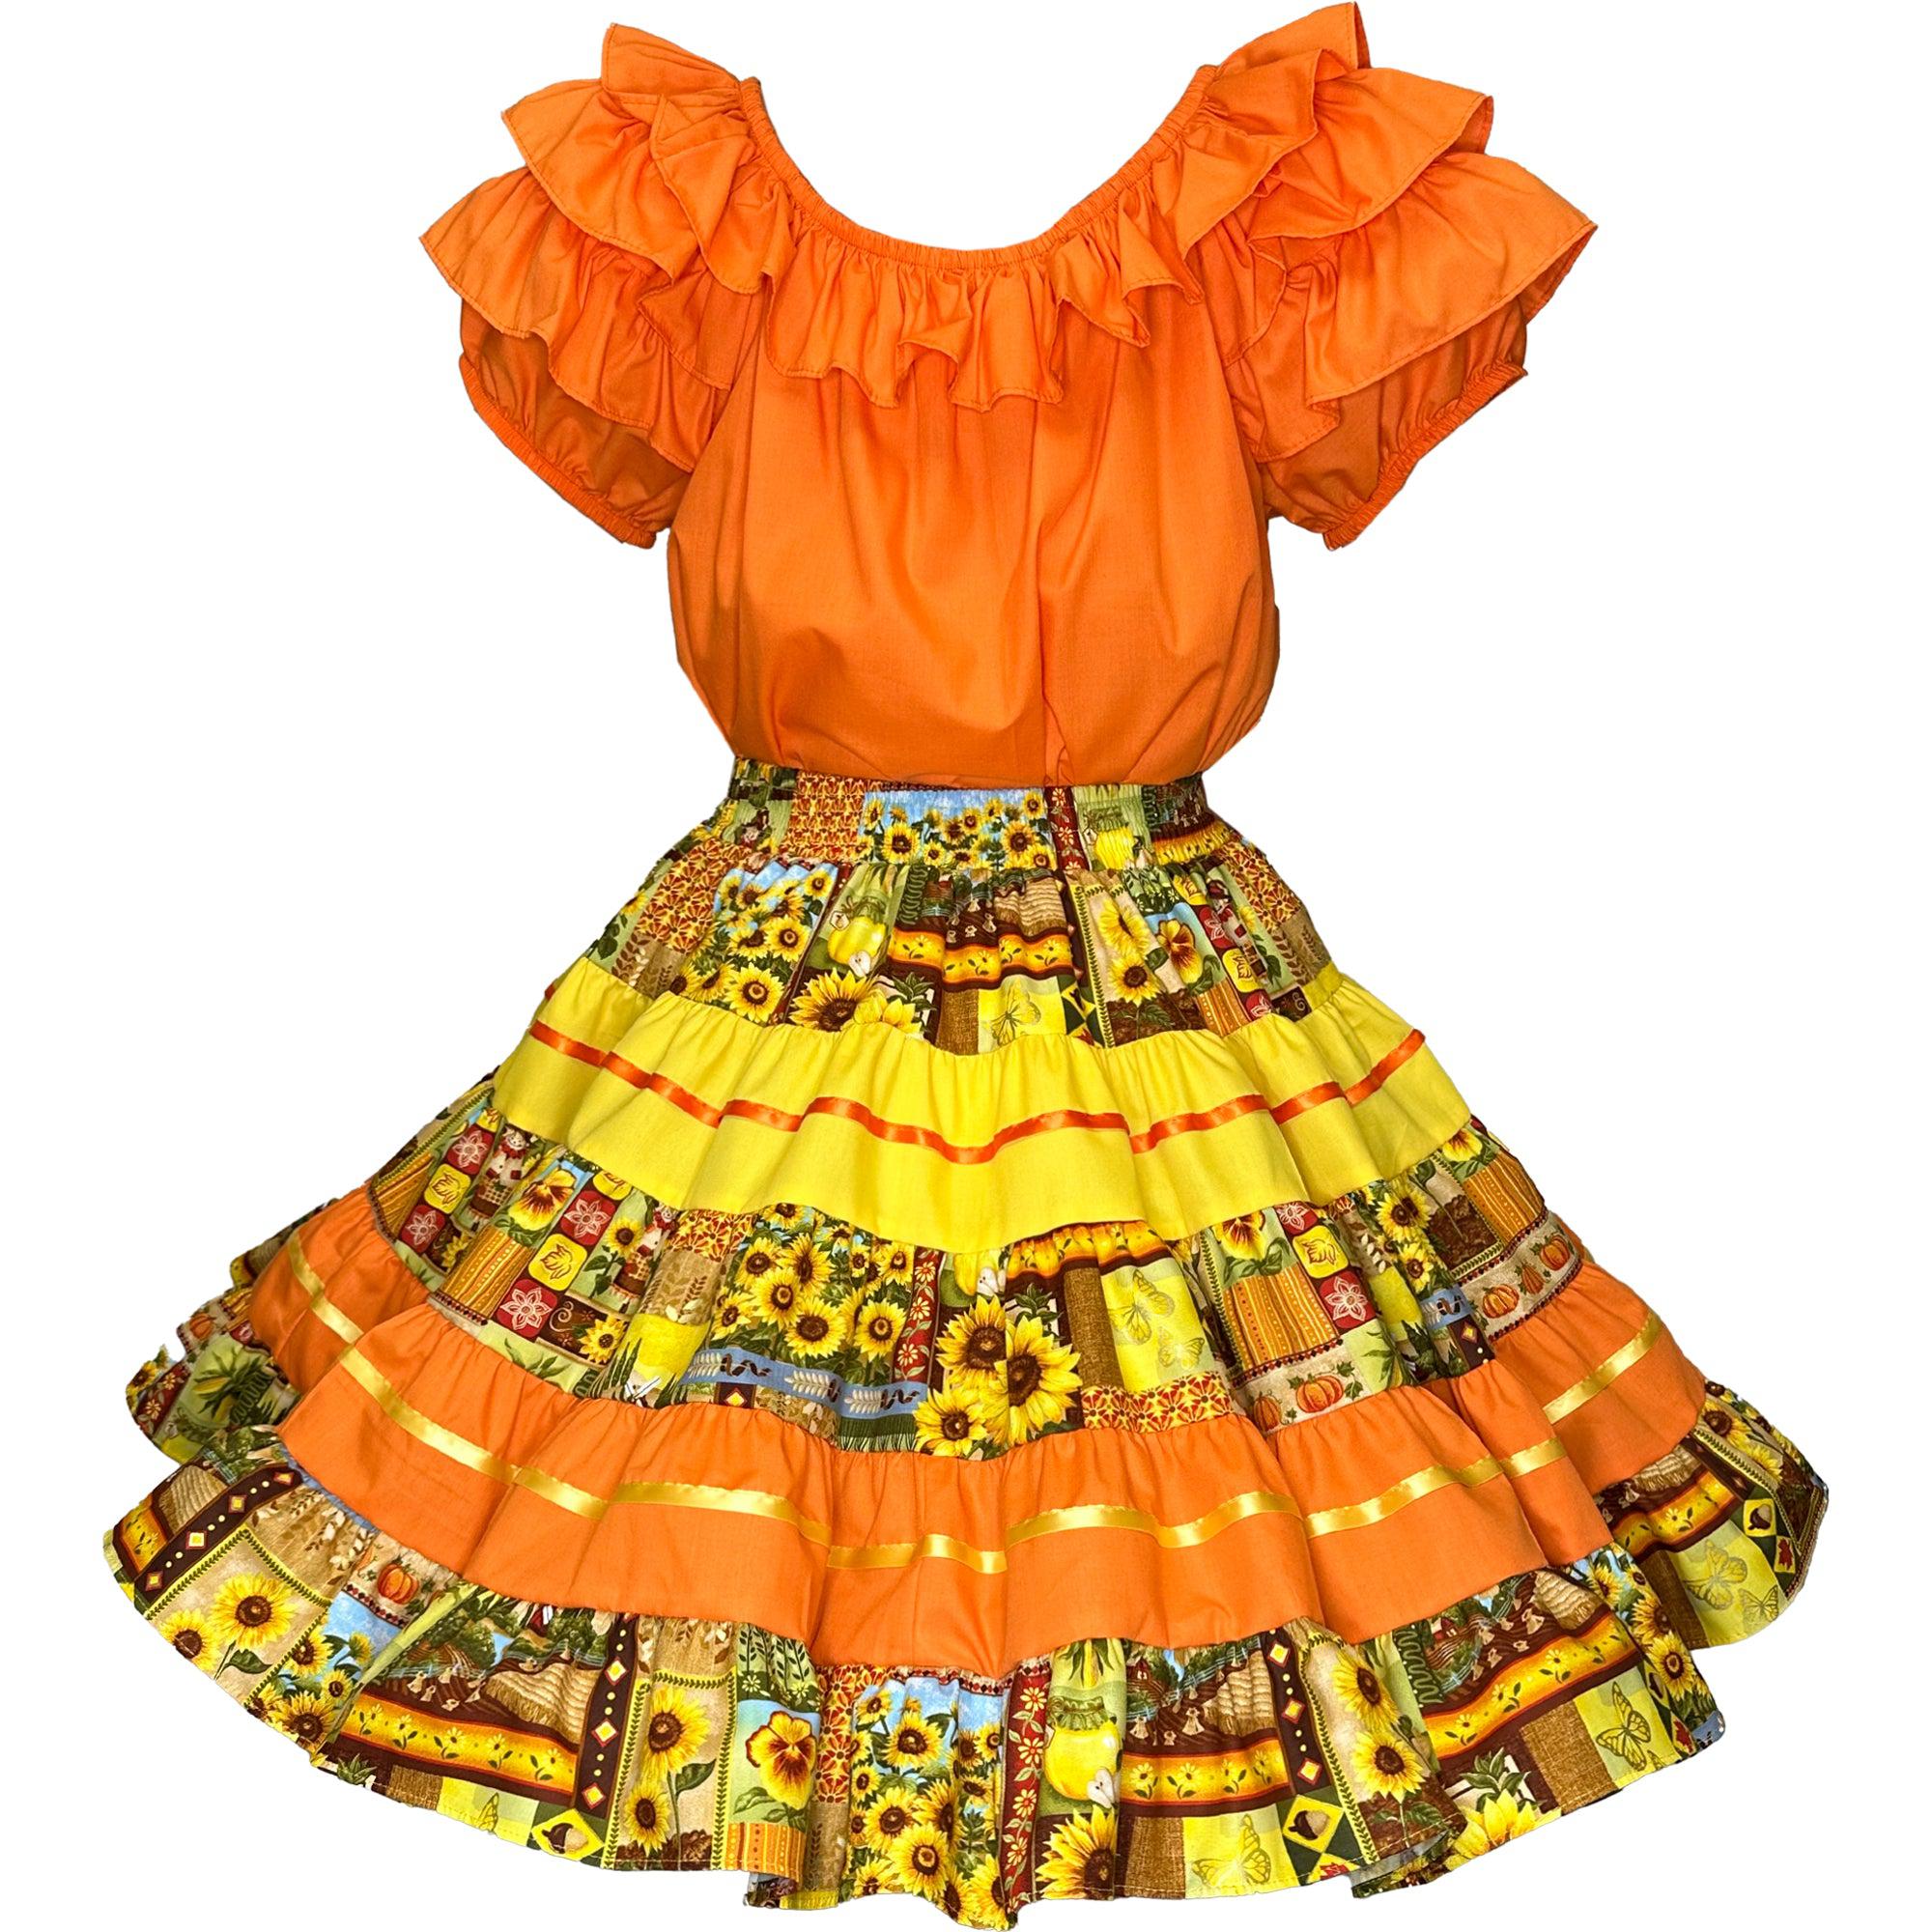 An Golden Harvest Fall Outfit dress with ruffles, perfect for autumn. (Brand: Square Up Fashions)